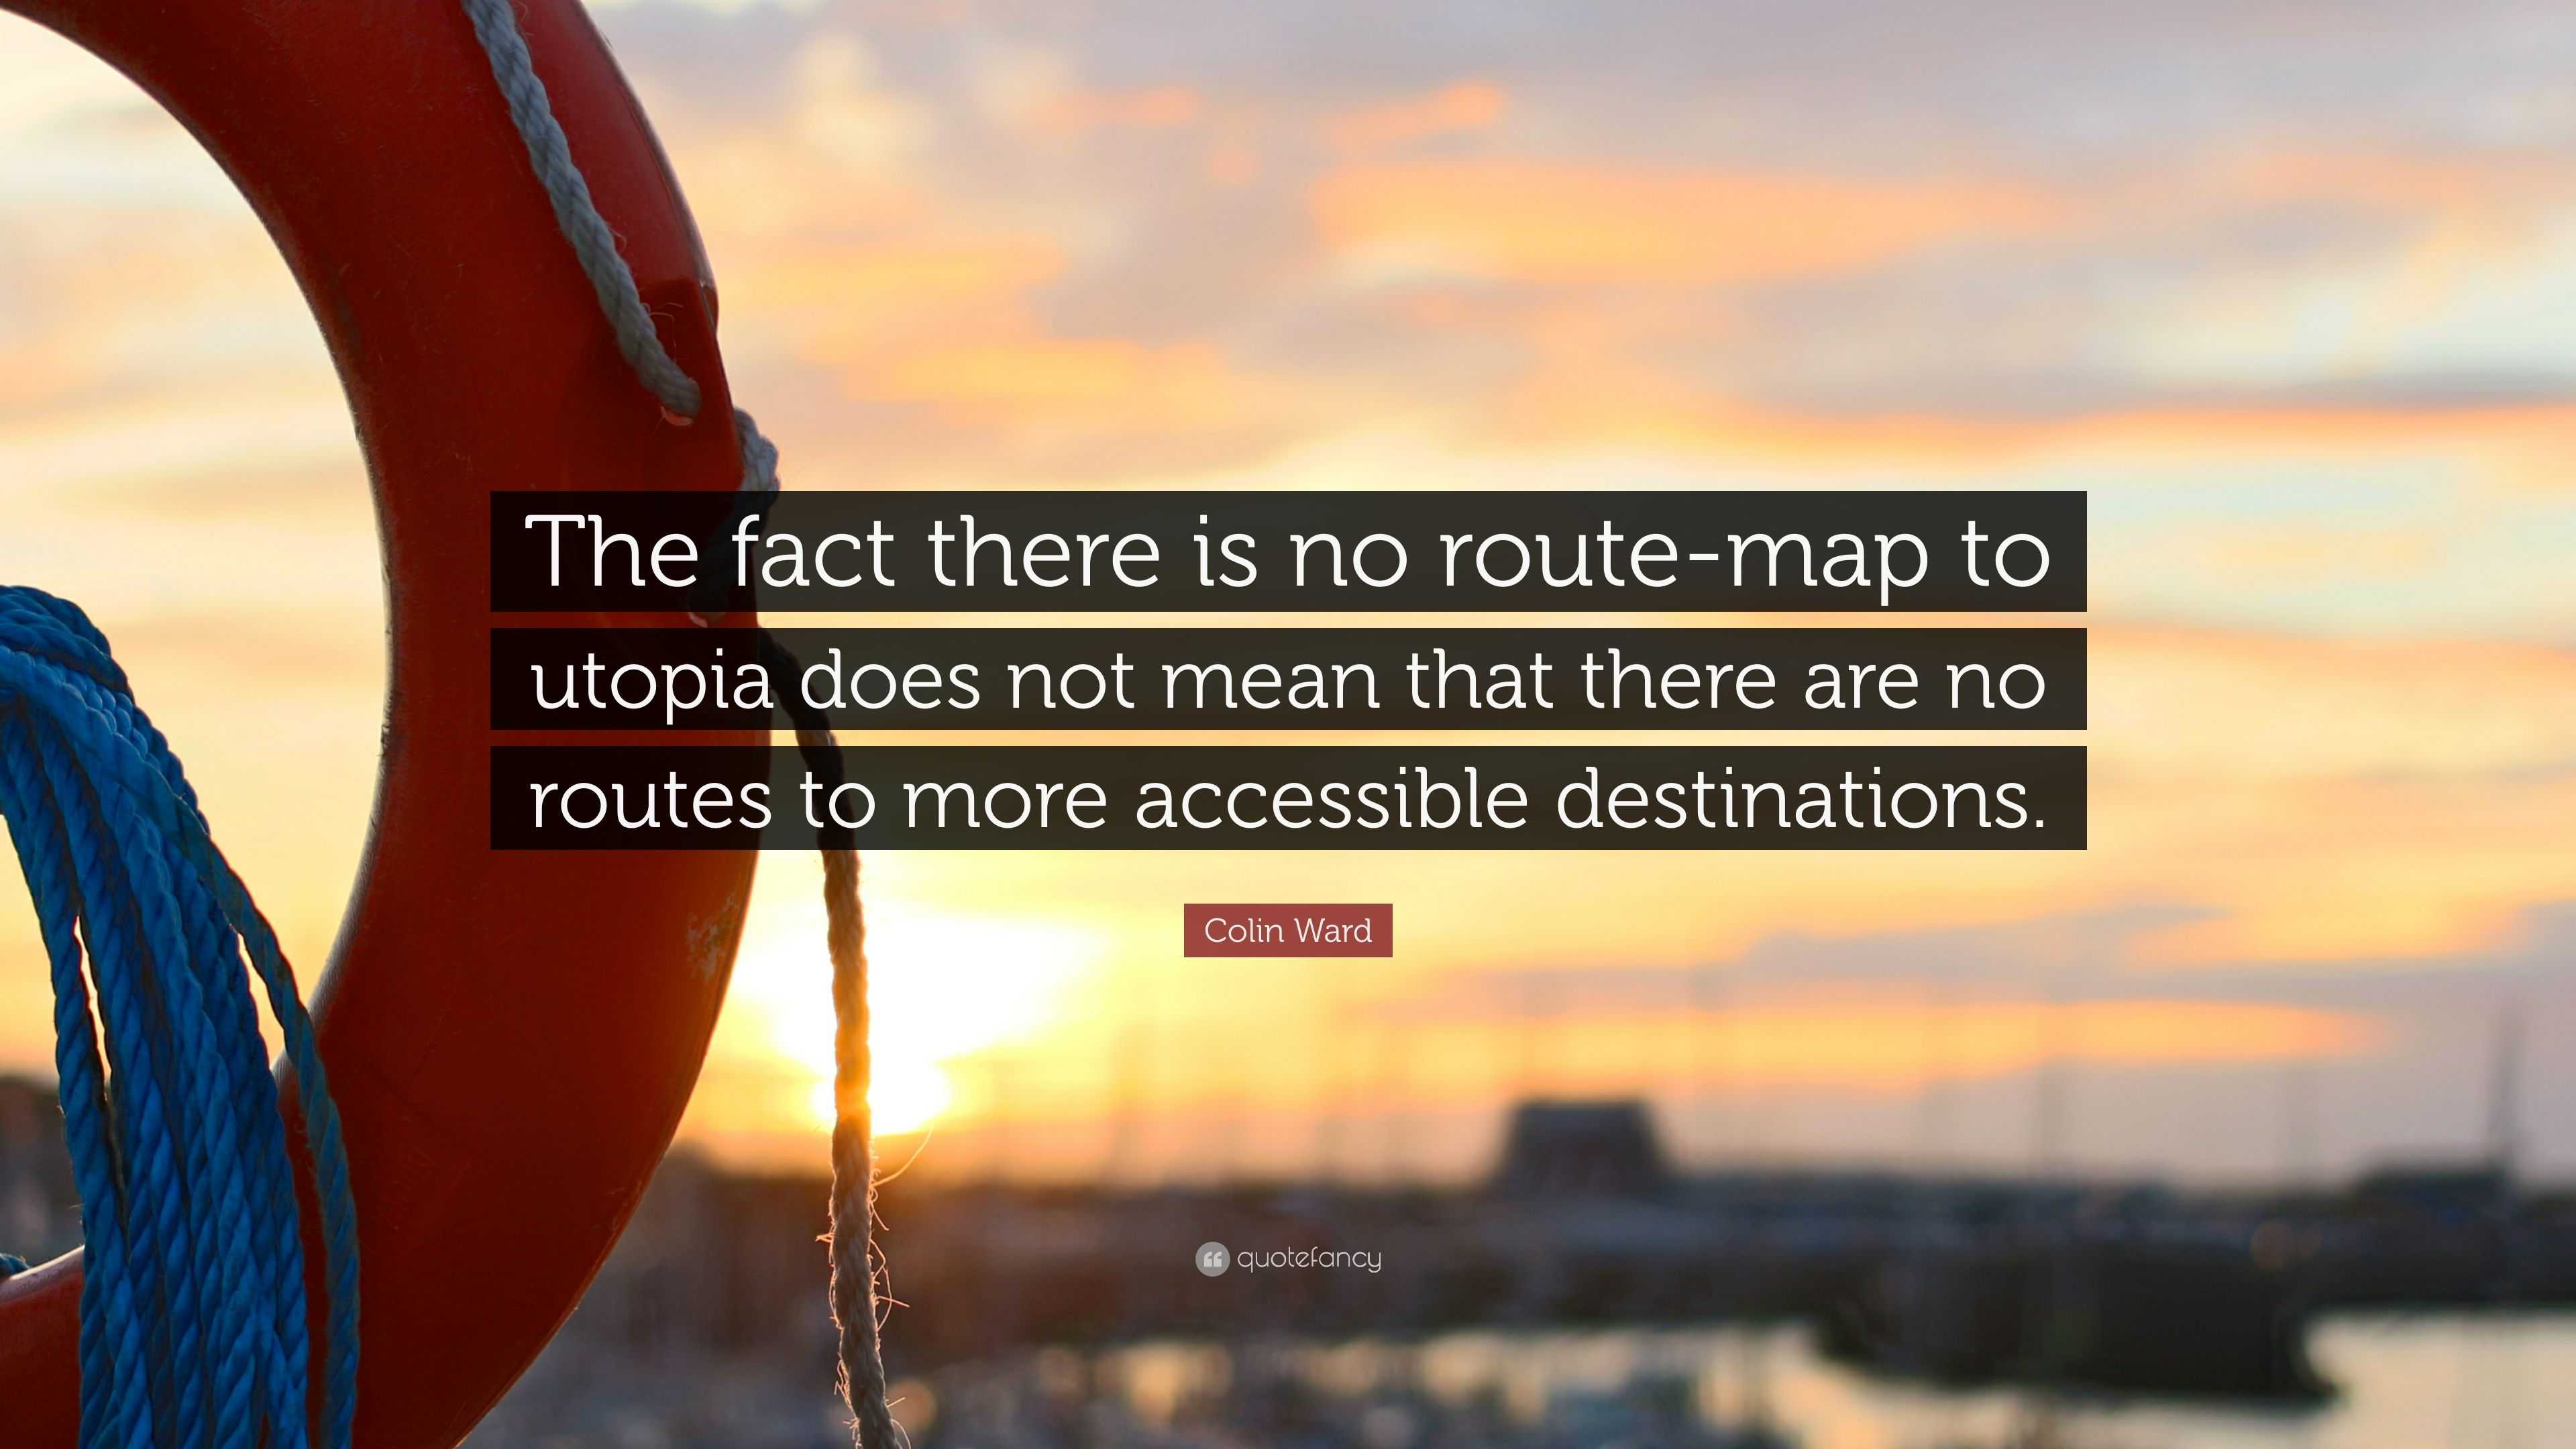 colin ward quote: “the fact there is no route-map to utopia does not